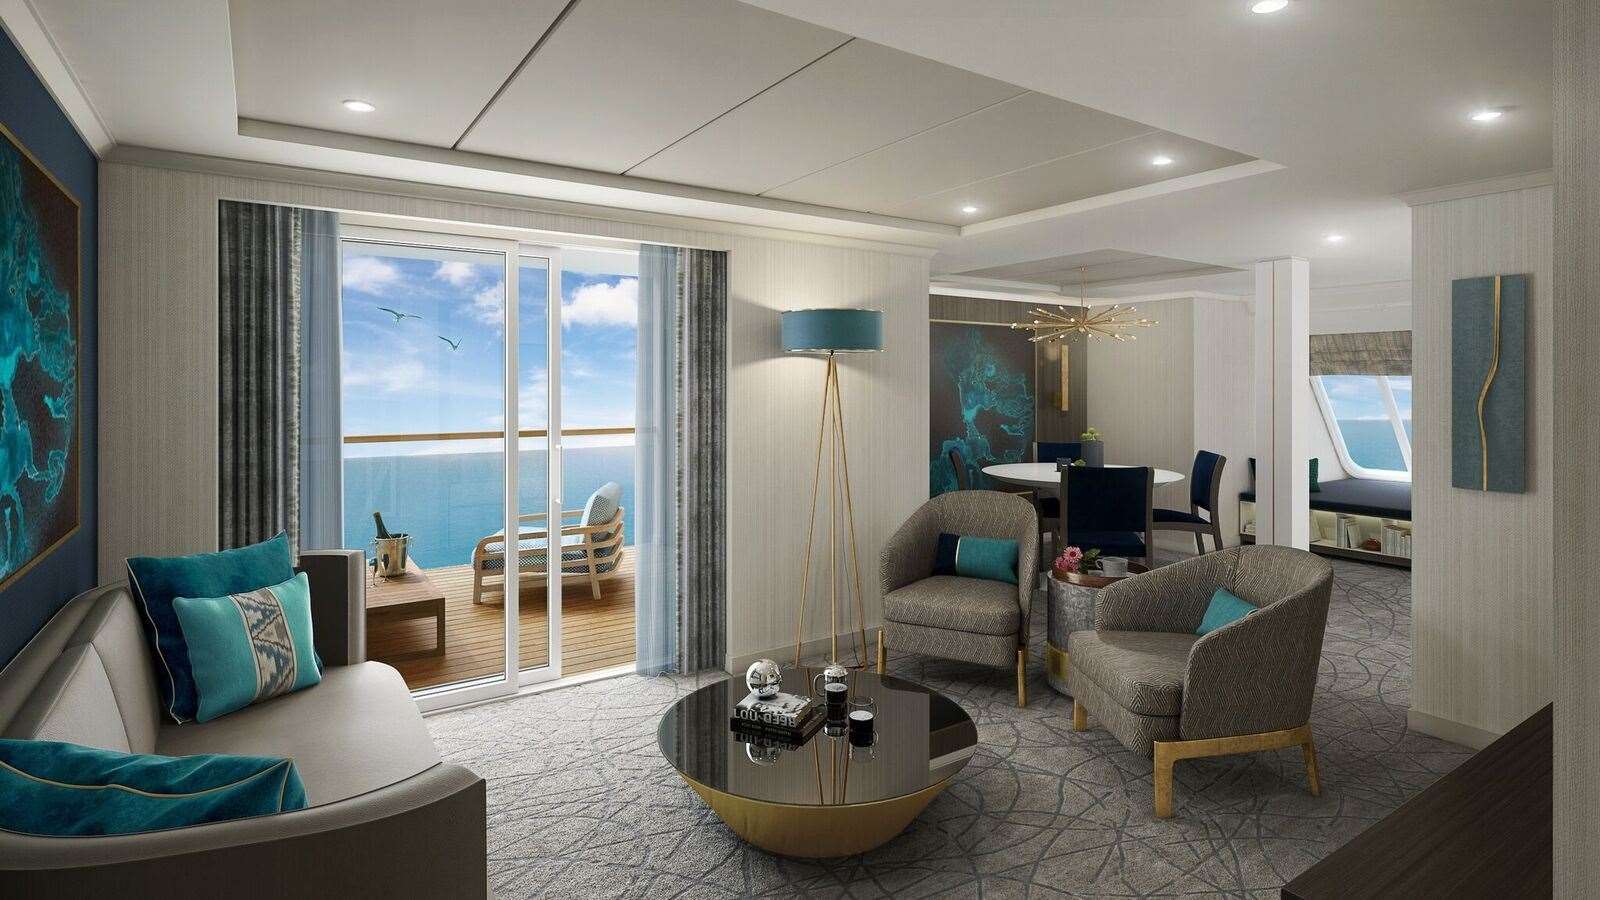 A suite inside the Spirit of Discovery cruise ship